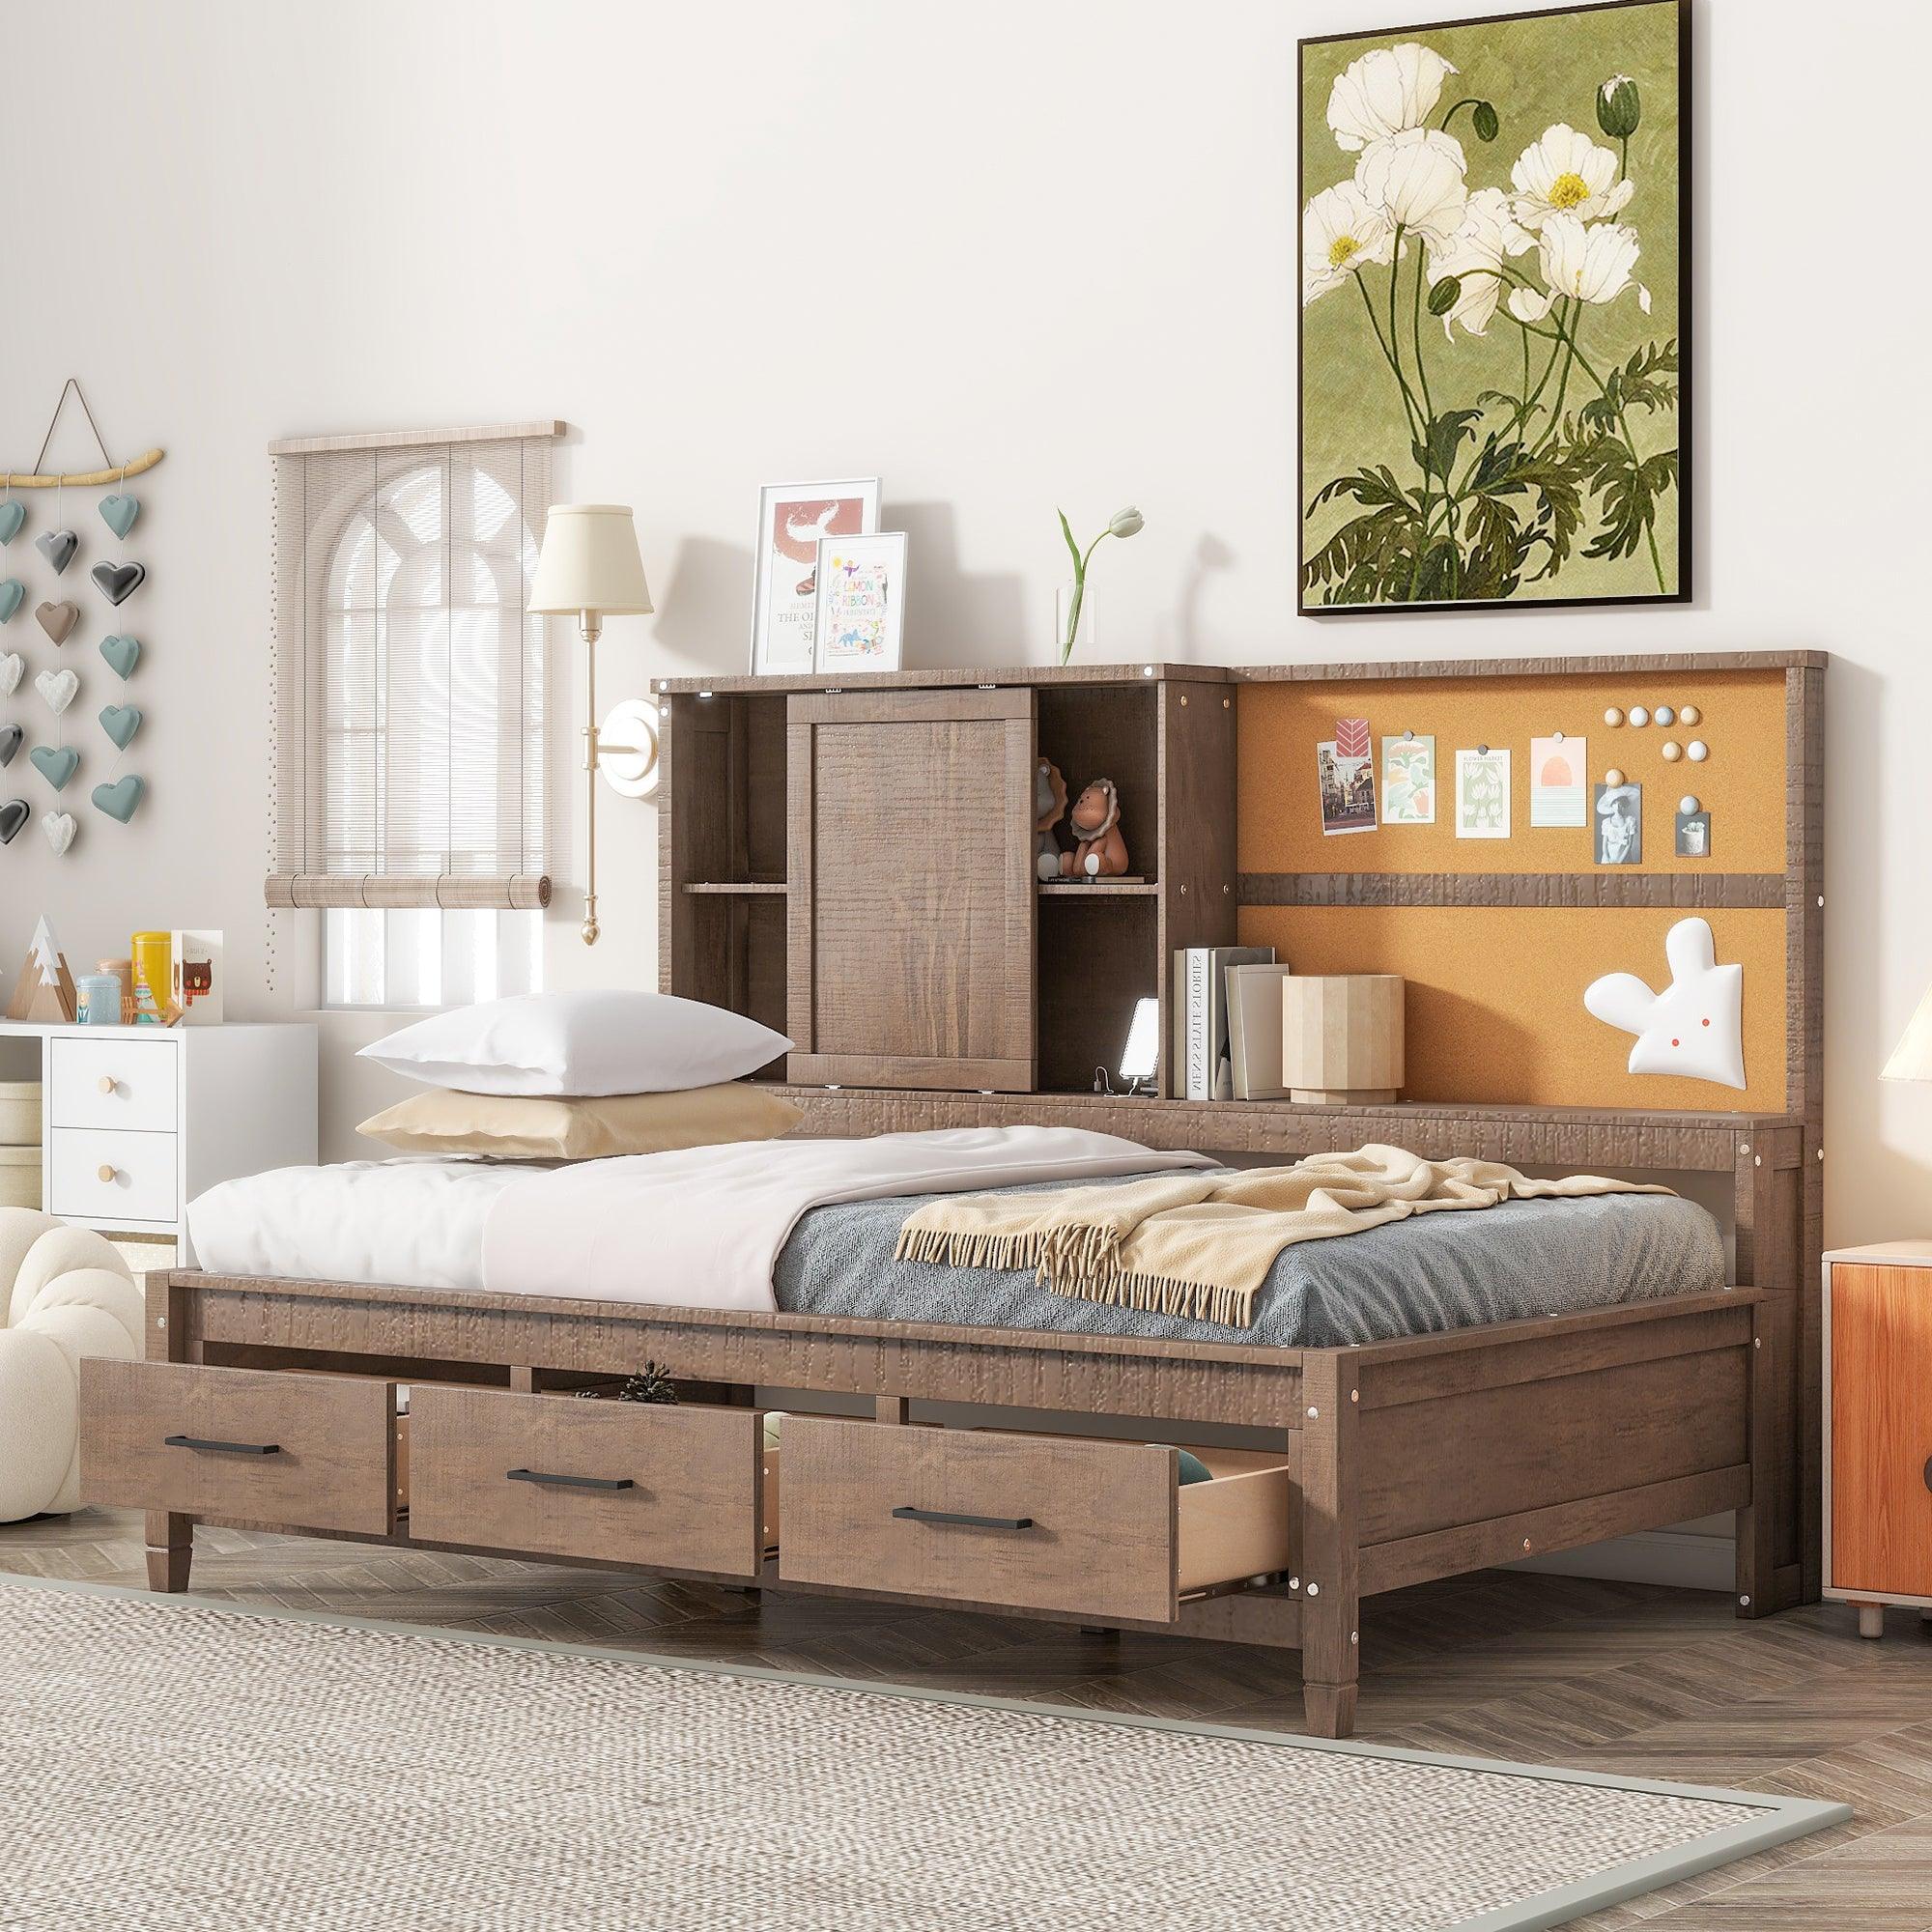 🆓🚛 Twin Size Lounge Daybed With Storage Shelves, Cork Board, Usb Ports & 3 Drawers, Antique Wood Color